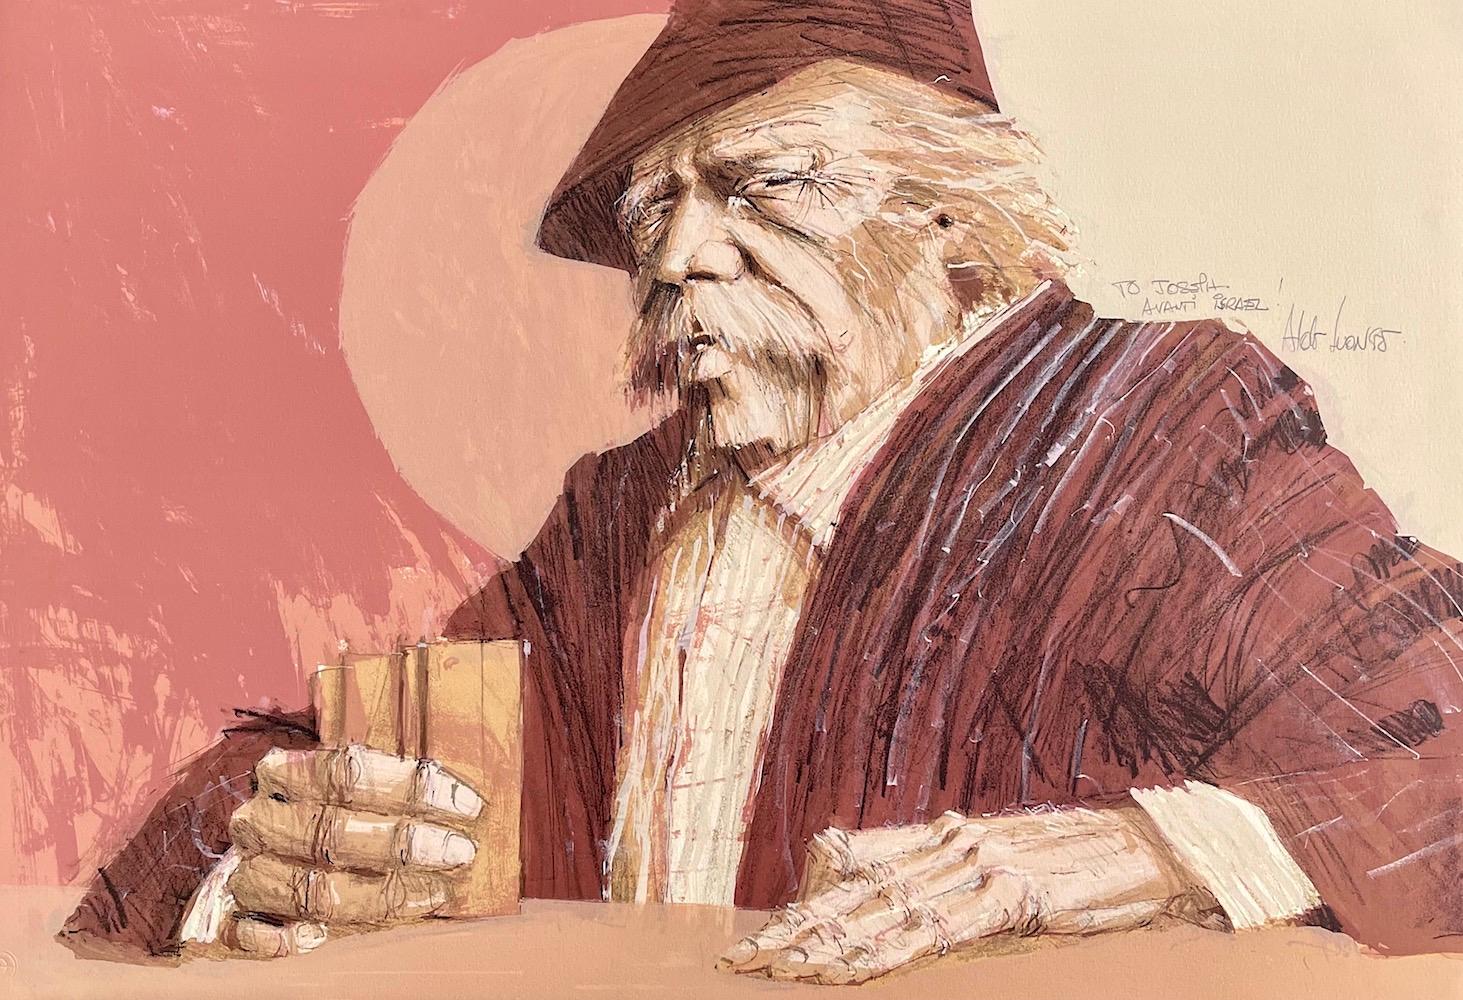 Aldo Luongo Figurative Print - THE HAWK Signed Lithograph, Portrait Man with Mustache, Poker Face, Pink Brown